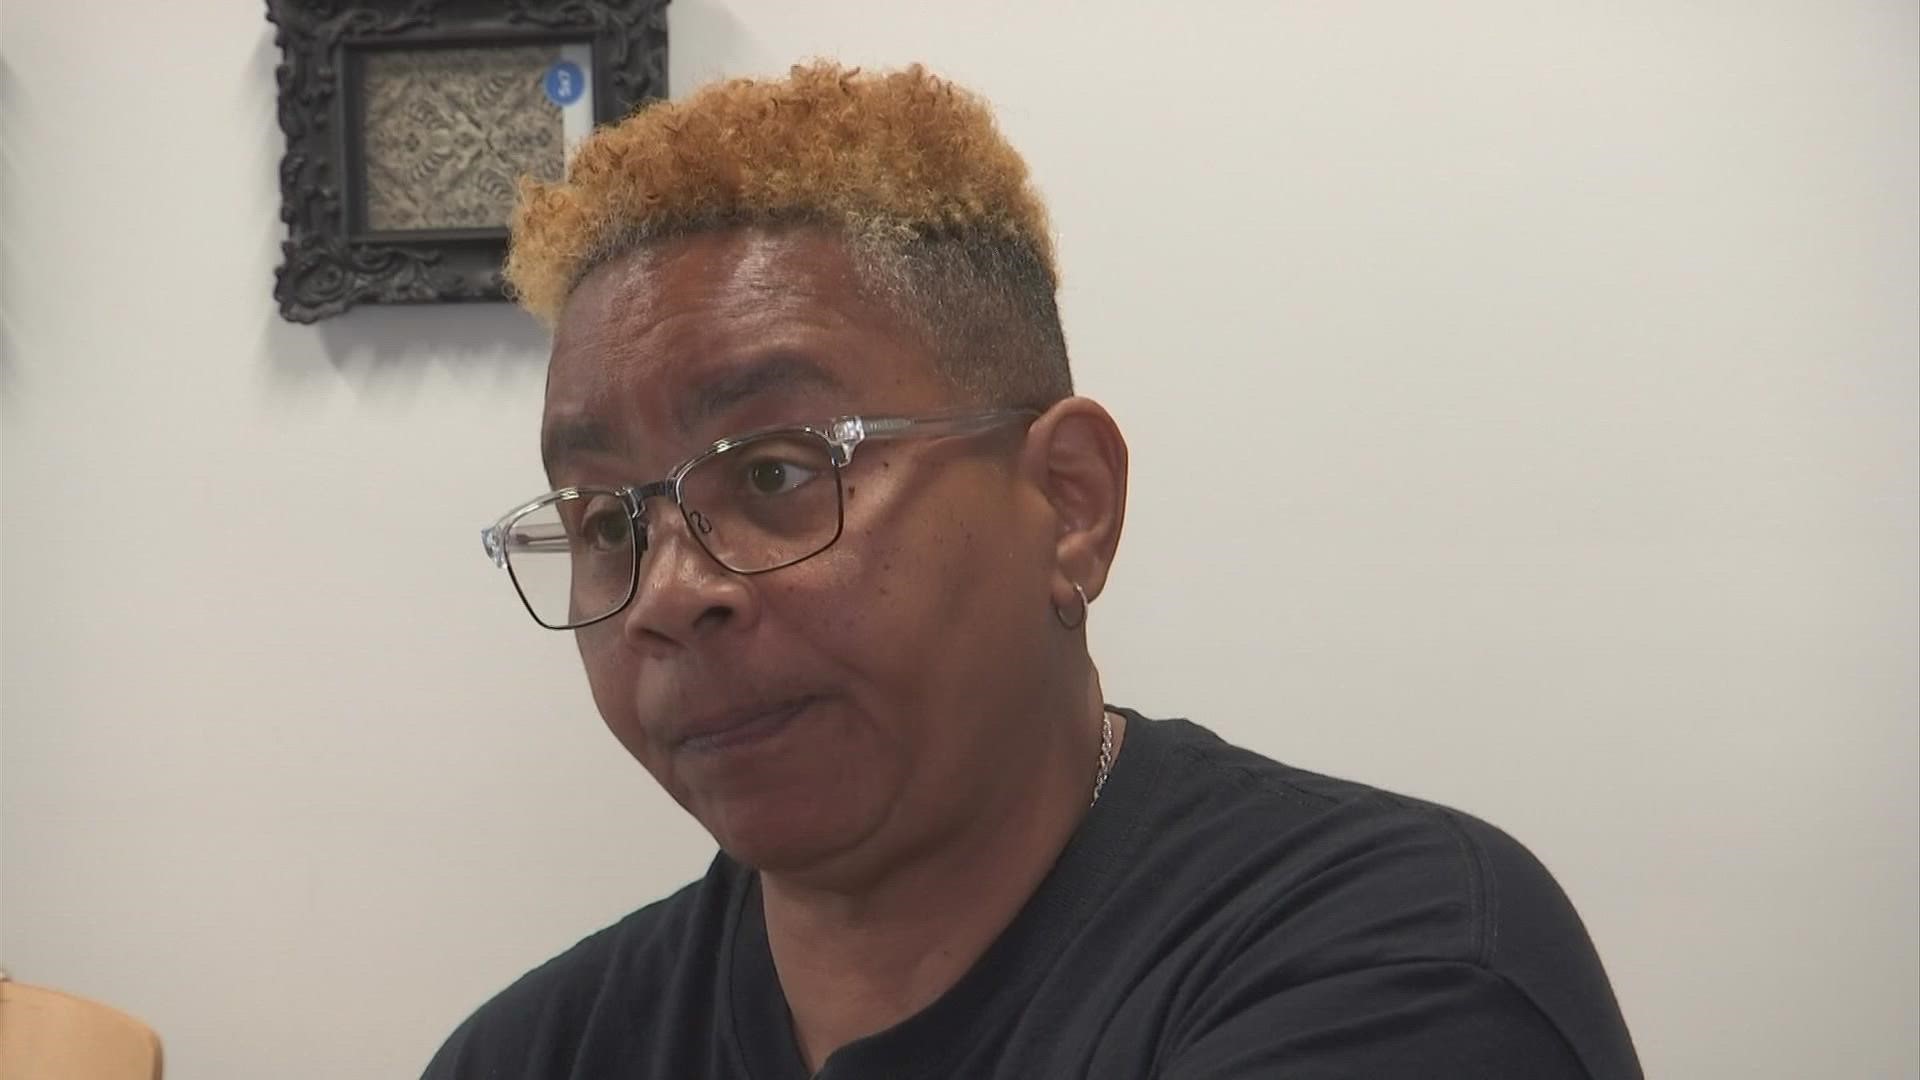 Gaylisa Carr spent 13 years in prison for involuntary manslaughter. Since she got out, she's been working to make sure other women don't turn to a life of crime.